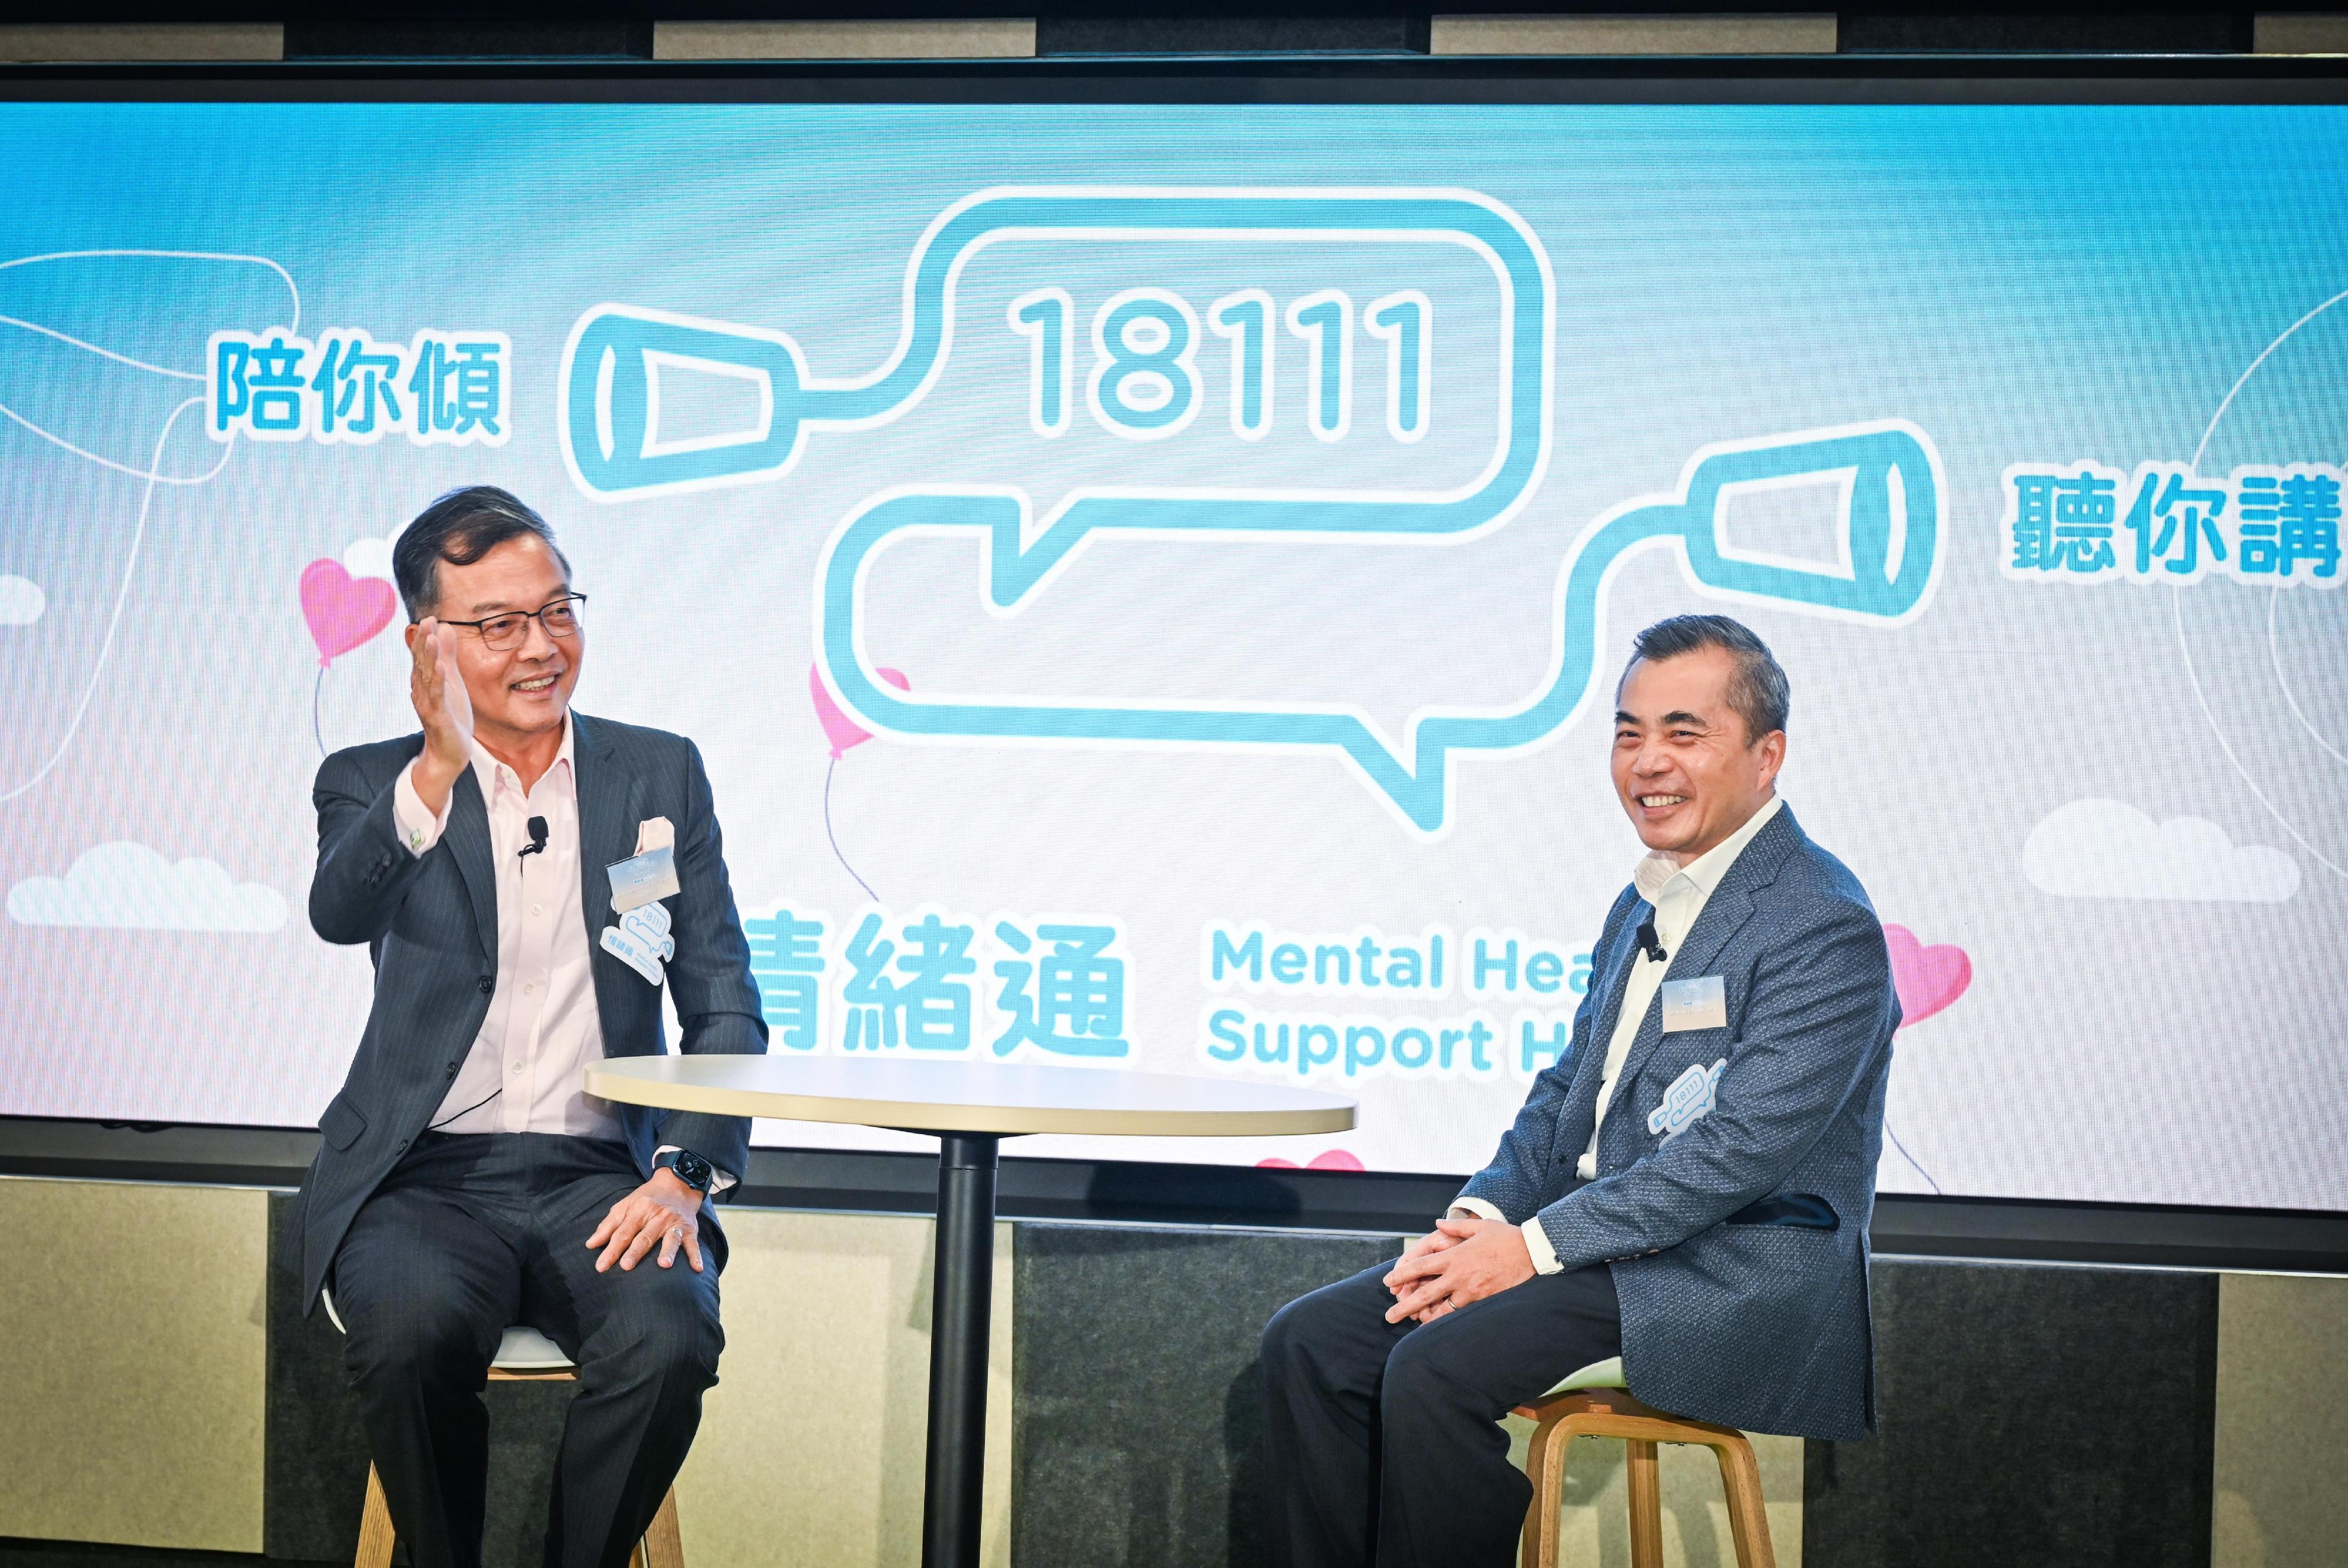 The Chairman of the Advisory Committee on Mental Health (ACMH), Dr Lam Ching-choi (left), and former Chairman of the ACMH, Mr Wong Yan-lung, SC (right), have an on-site interactive session at the kick-off ceremony of the "18111 - Mental Health Support Hotline" this afternoon (December 27) to talk about the rationales behind the setting-up of the hotline and the work done to make it happen, as well as how the hotline will help support the public in a more effective manner.